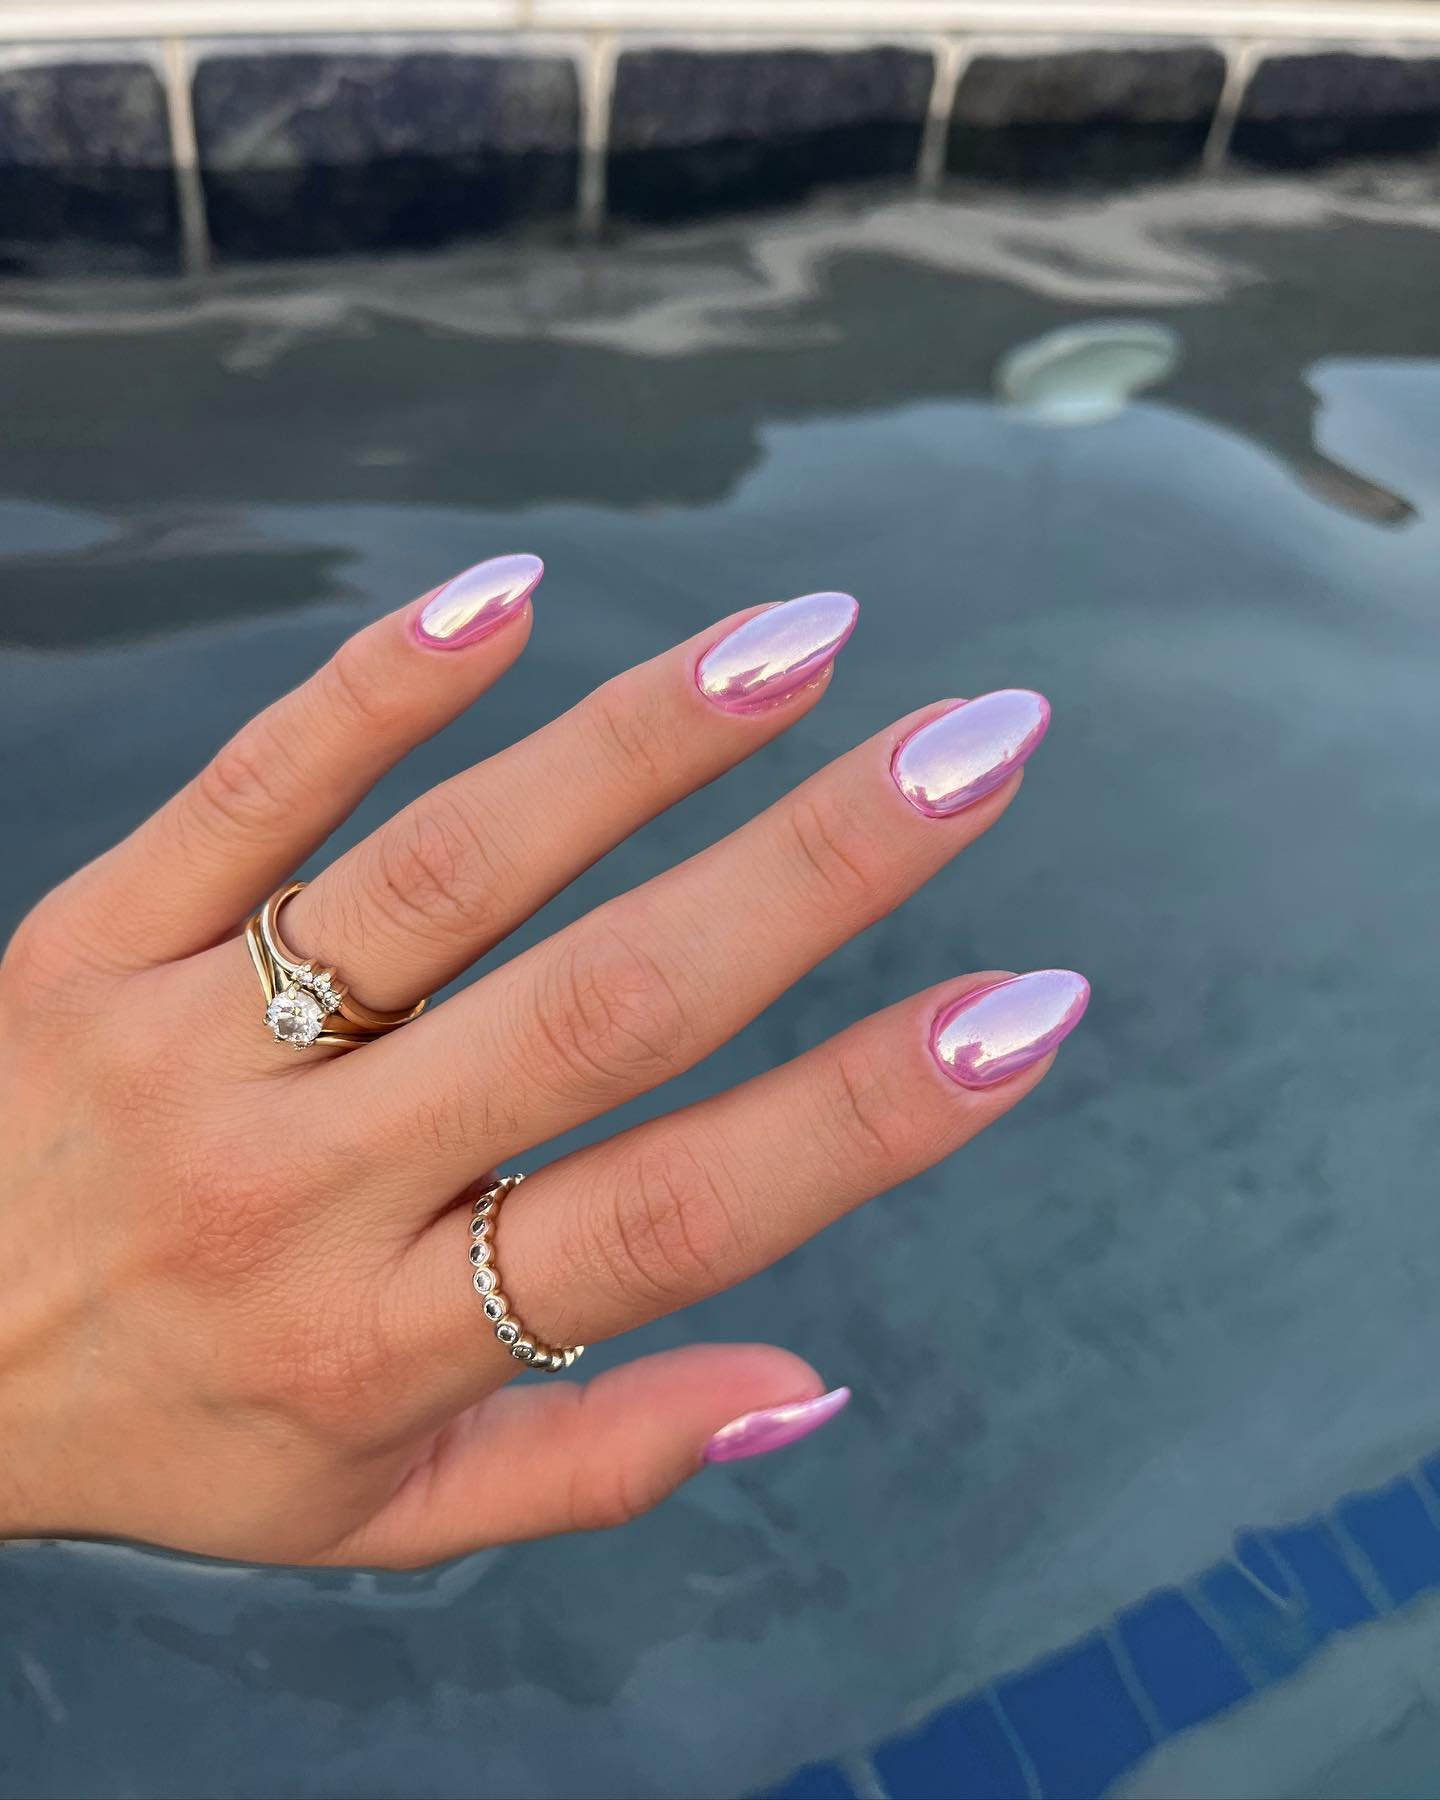 8 - Picture of Chrome Nails